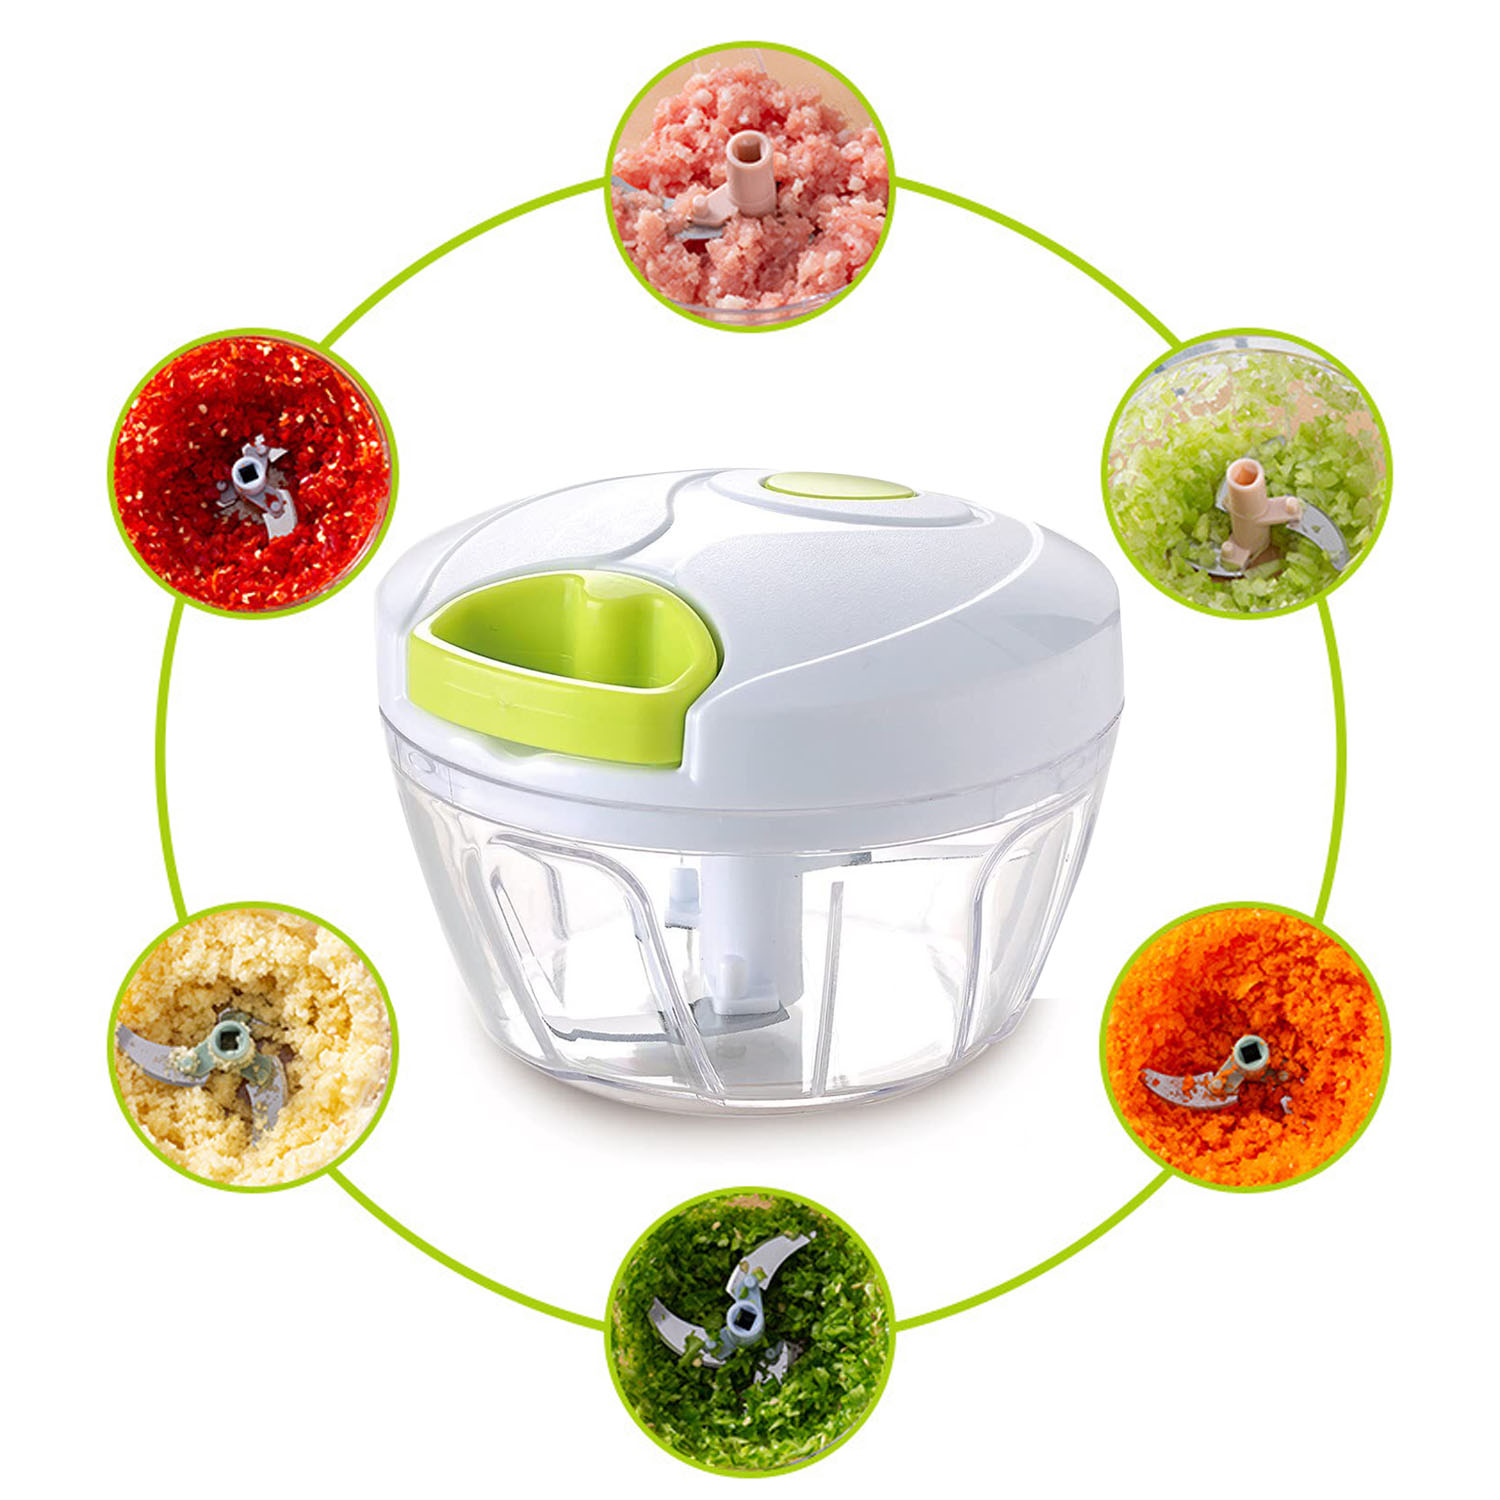 Manual Food Chopper for Vegetable Fruits Nuts Onions Chopper Hand Pull Mincer Blender Mixer Kitchen Cutter